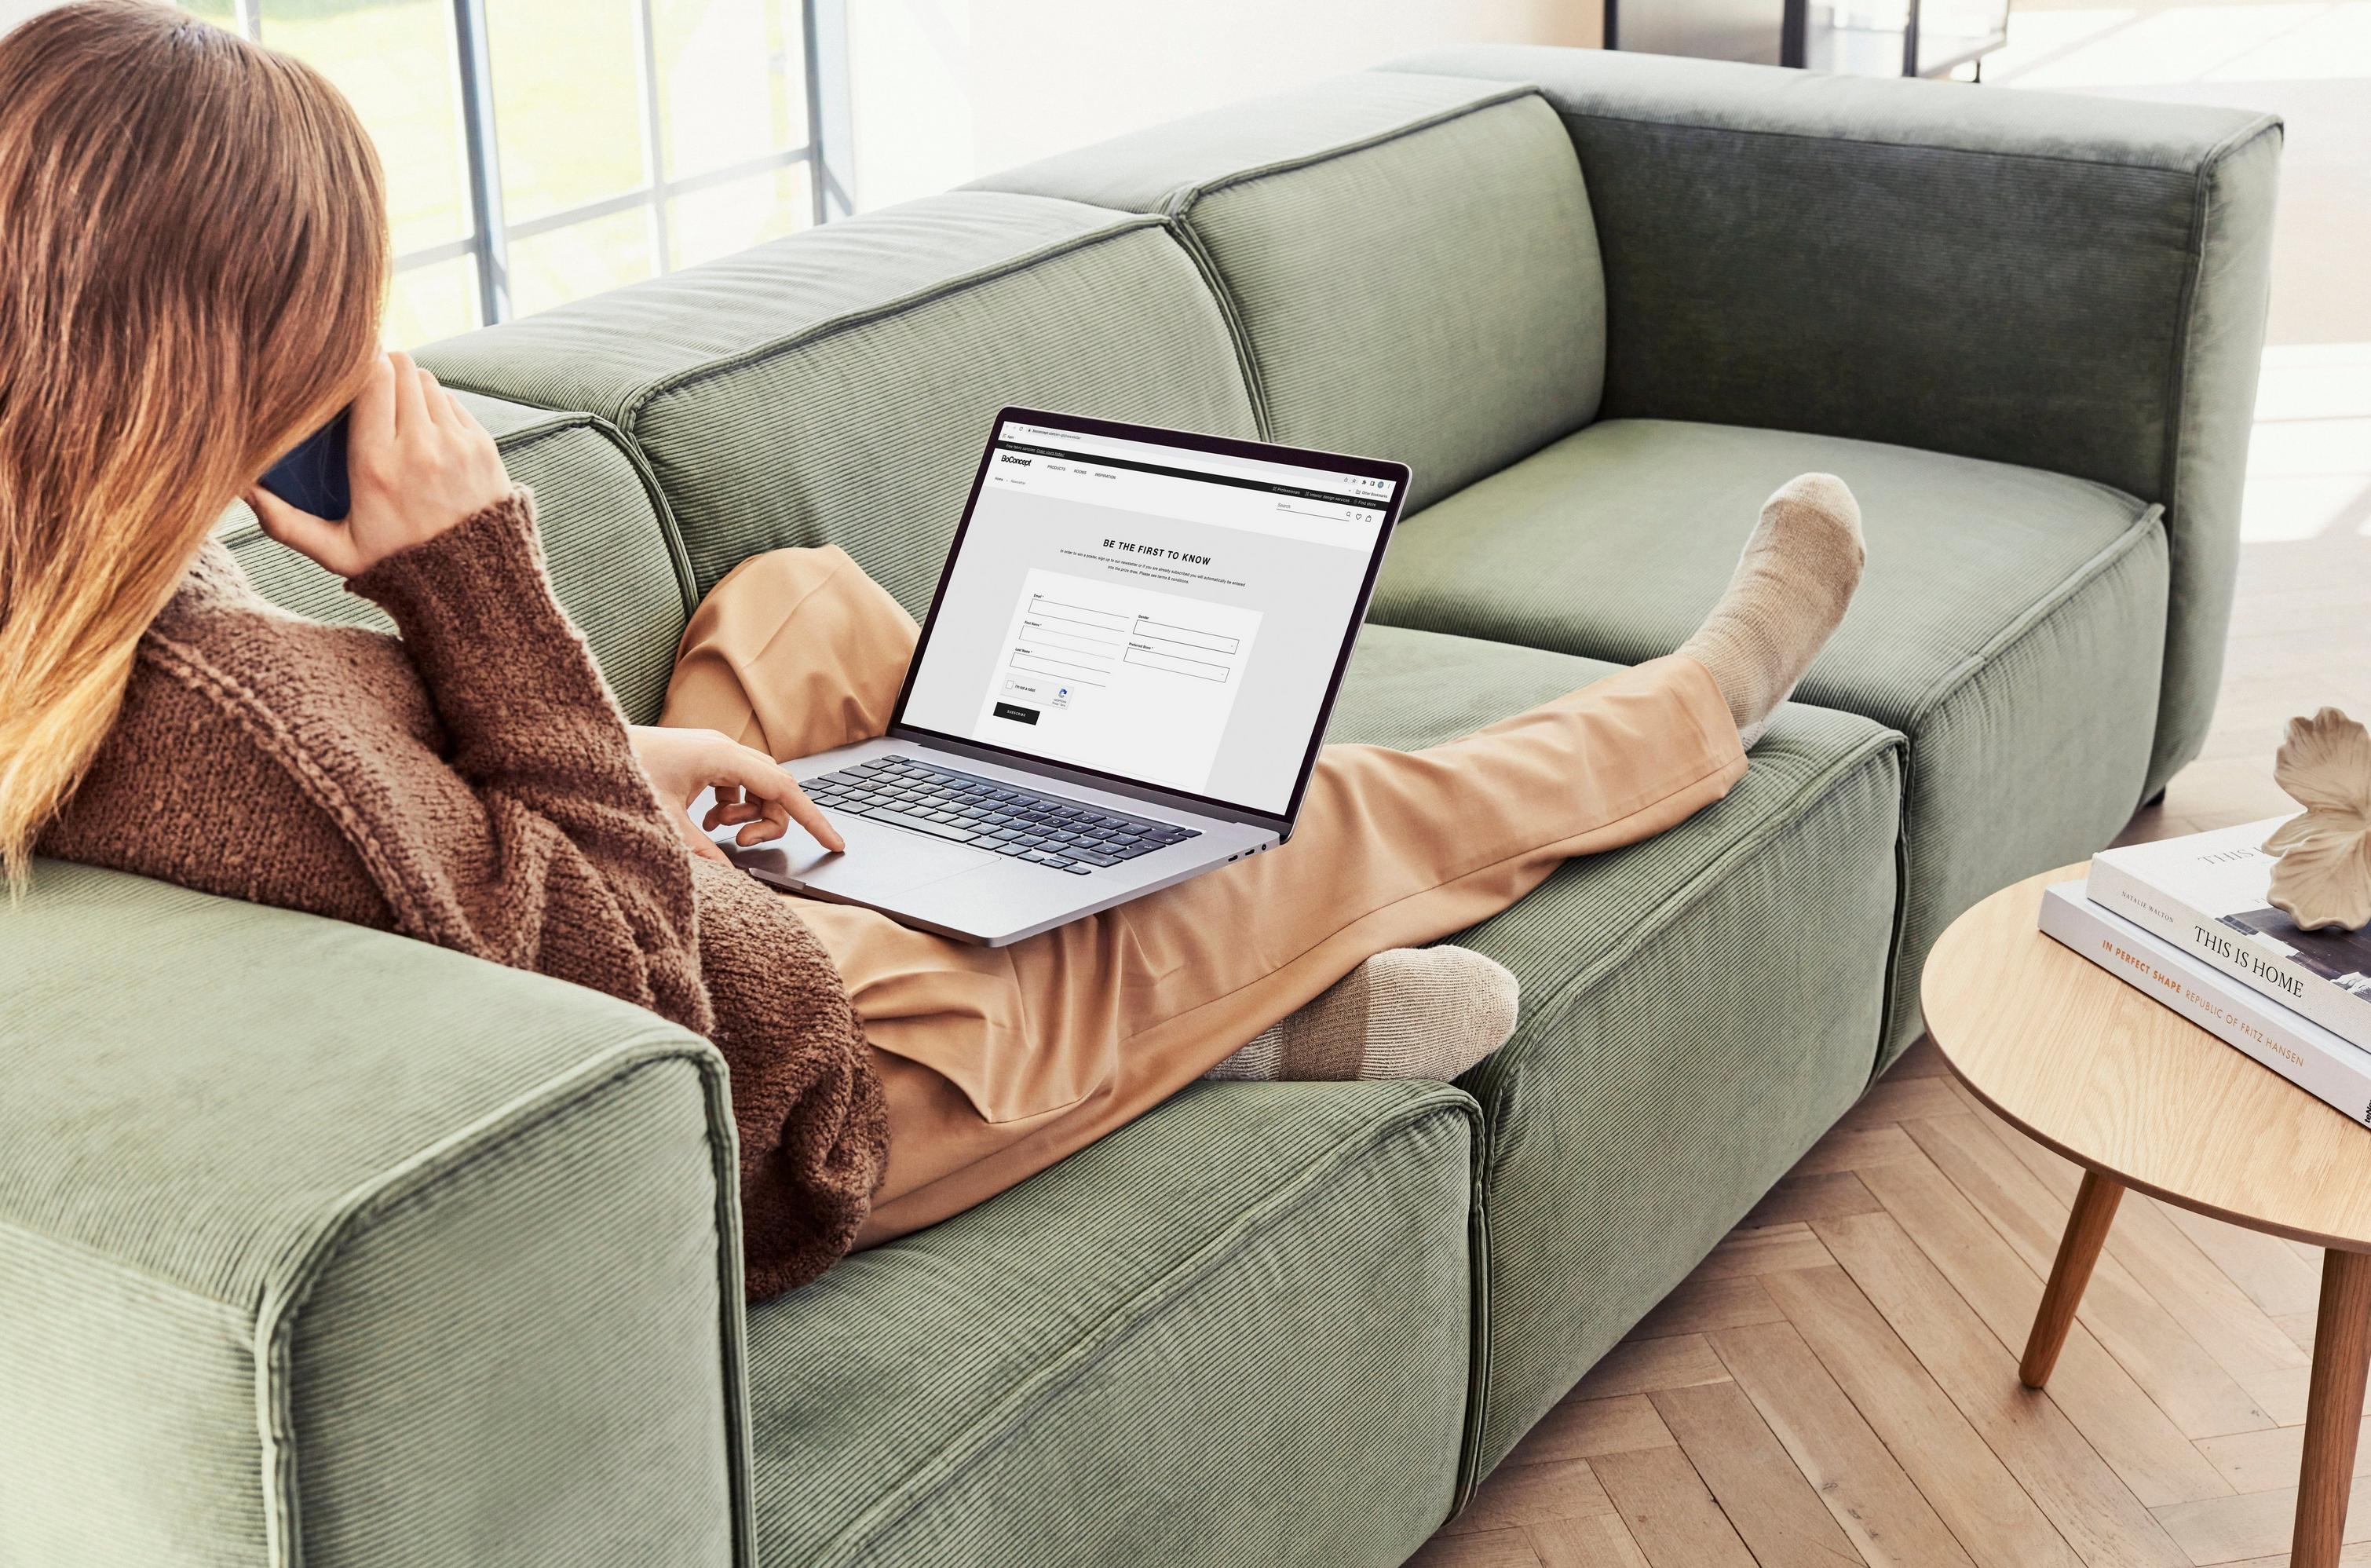 Woman on Carmo green sofa using laptop, with brown clothes and wooden side table.